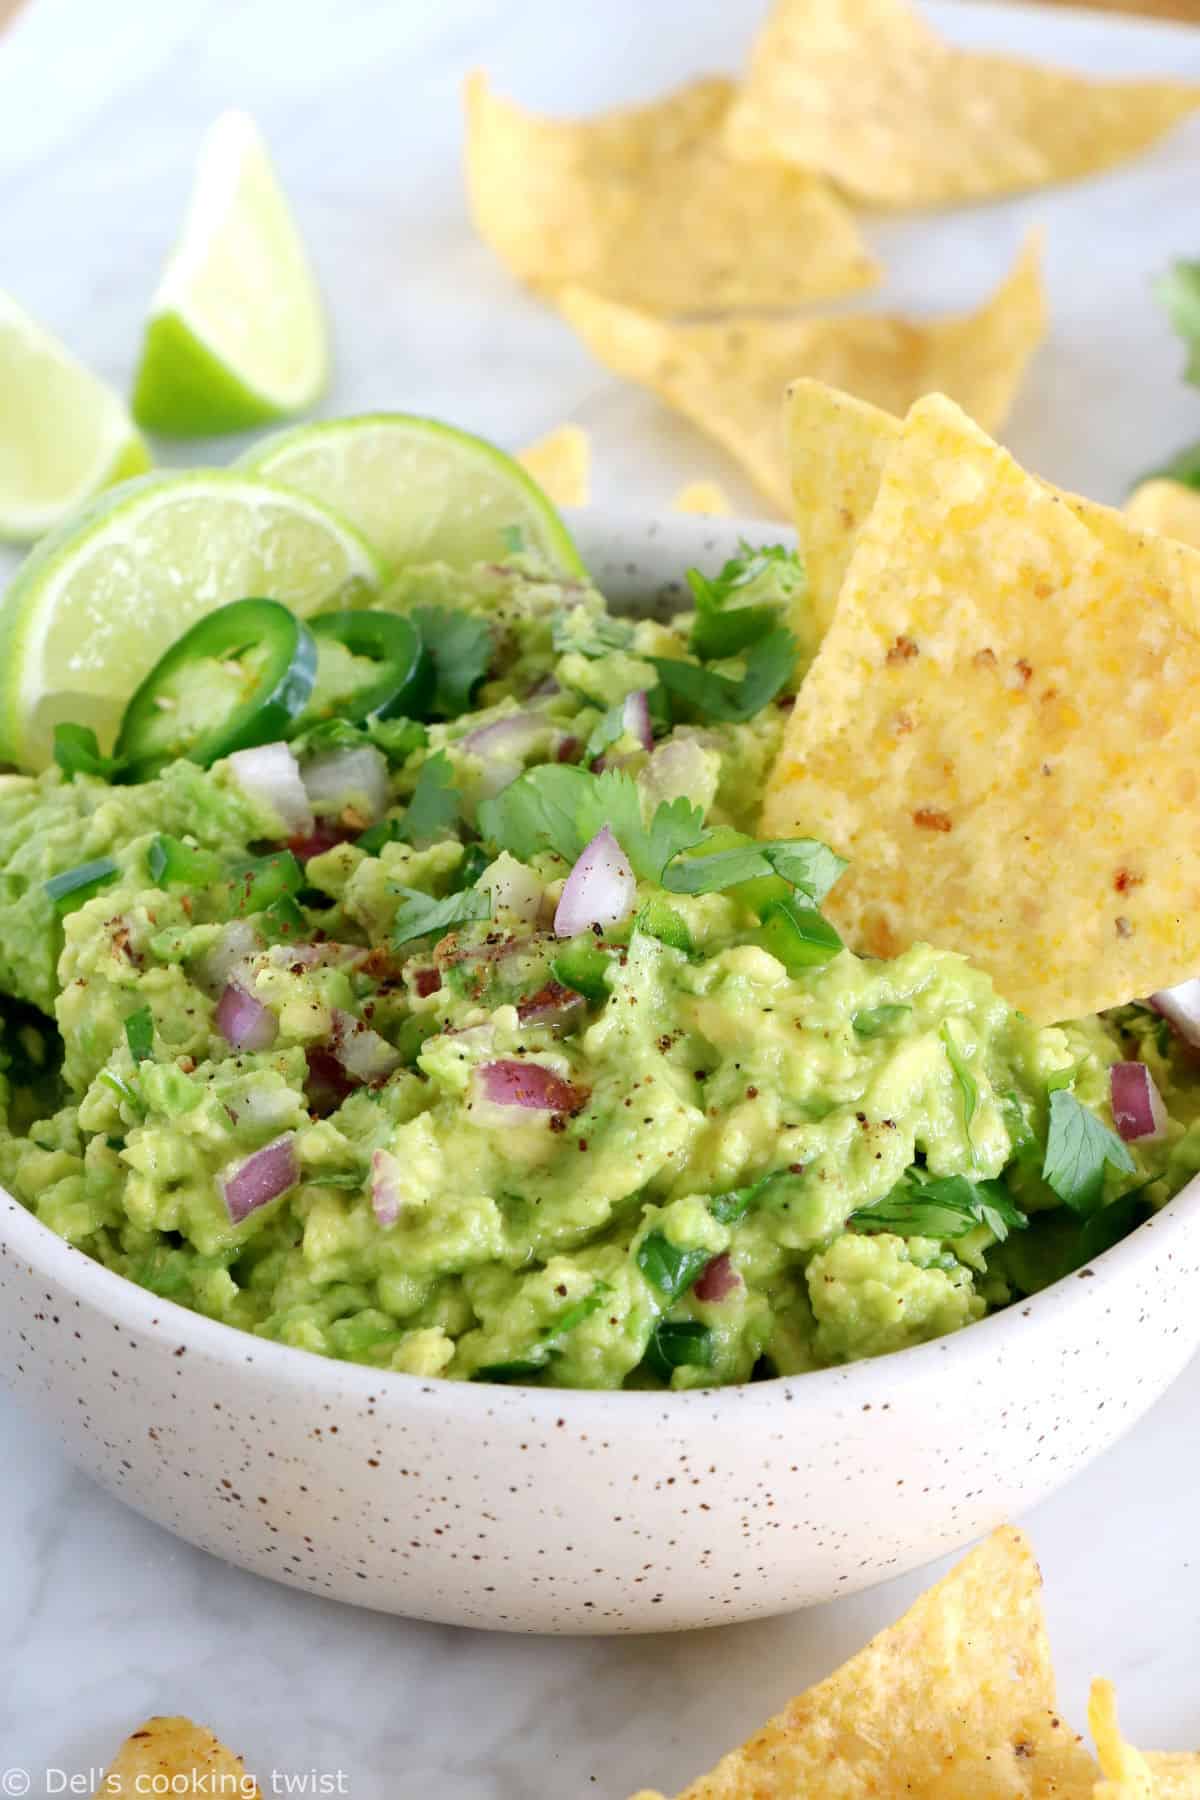 This is hands down the best guacamole recipe out there. Easy to make, with just 6 ingredients, this authentic guacamole is perfectly creamy, loaded with refreshing flavors, and always a hit at parties.